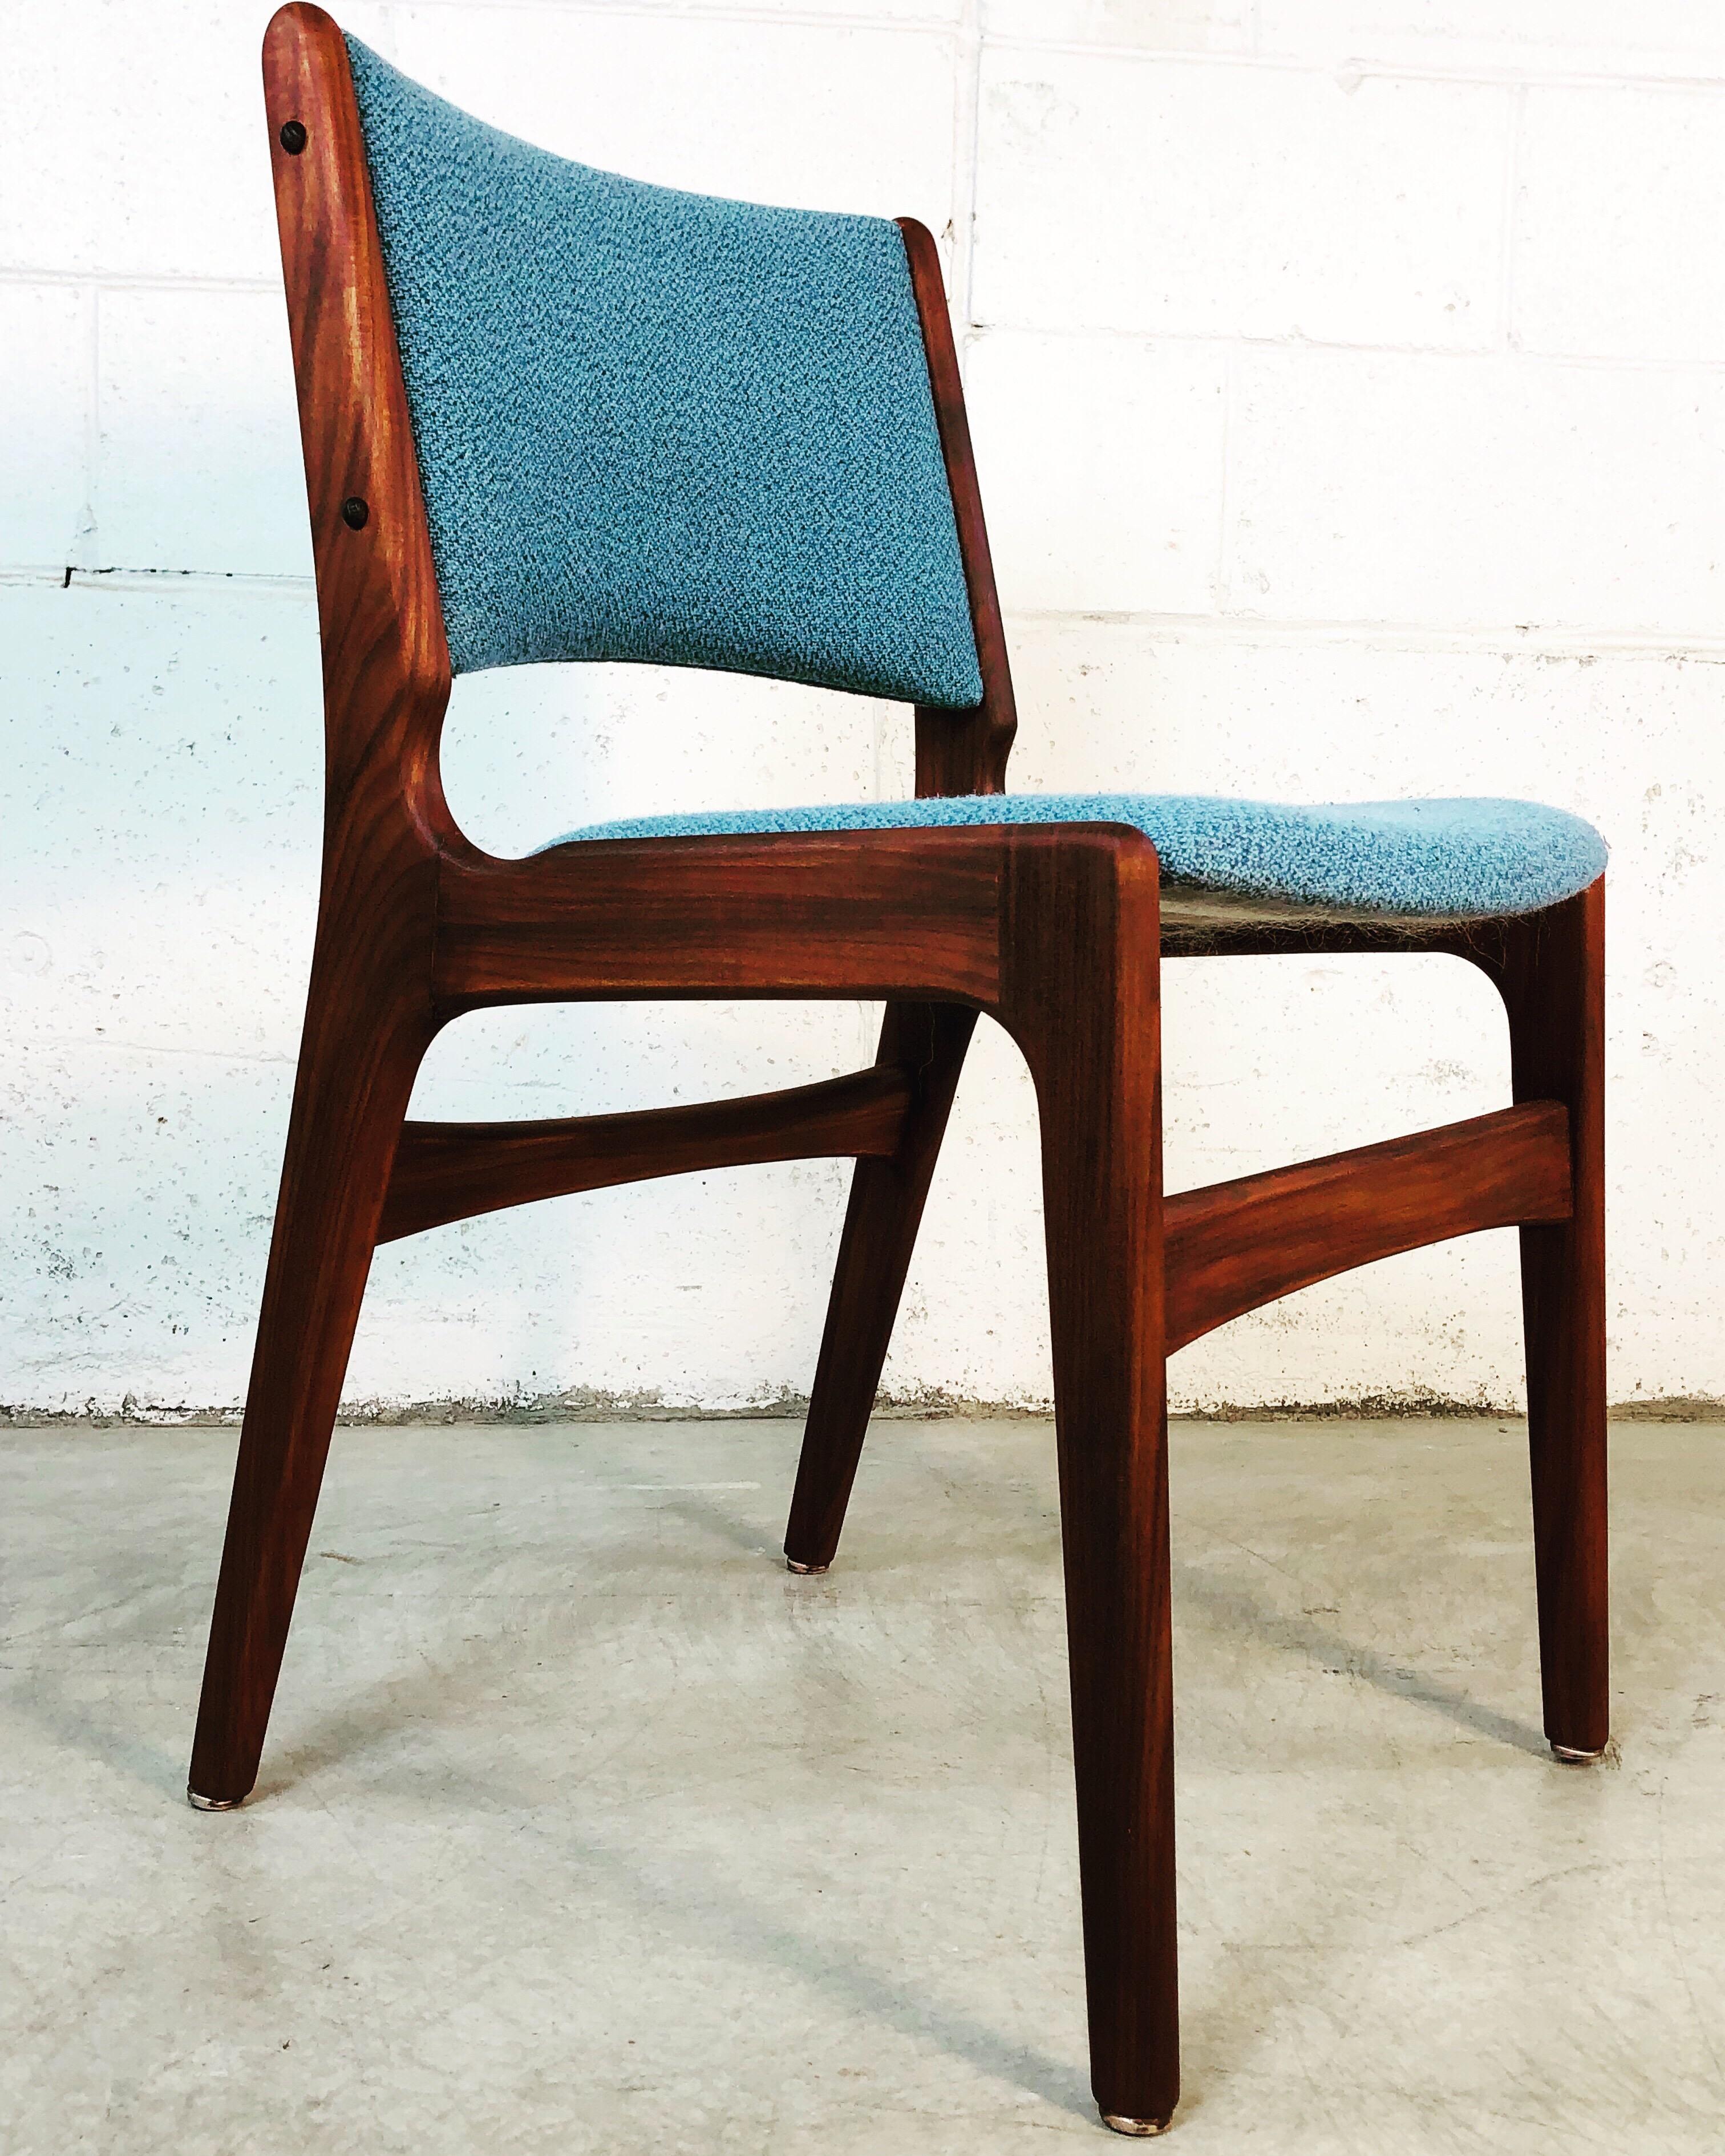 1960s Danish Teak Dining Room Chairs, Set of 4 For Sale 3